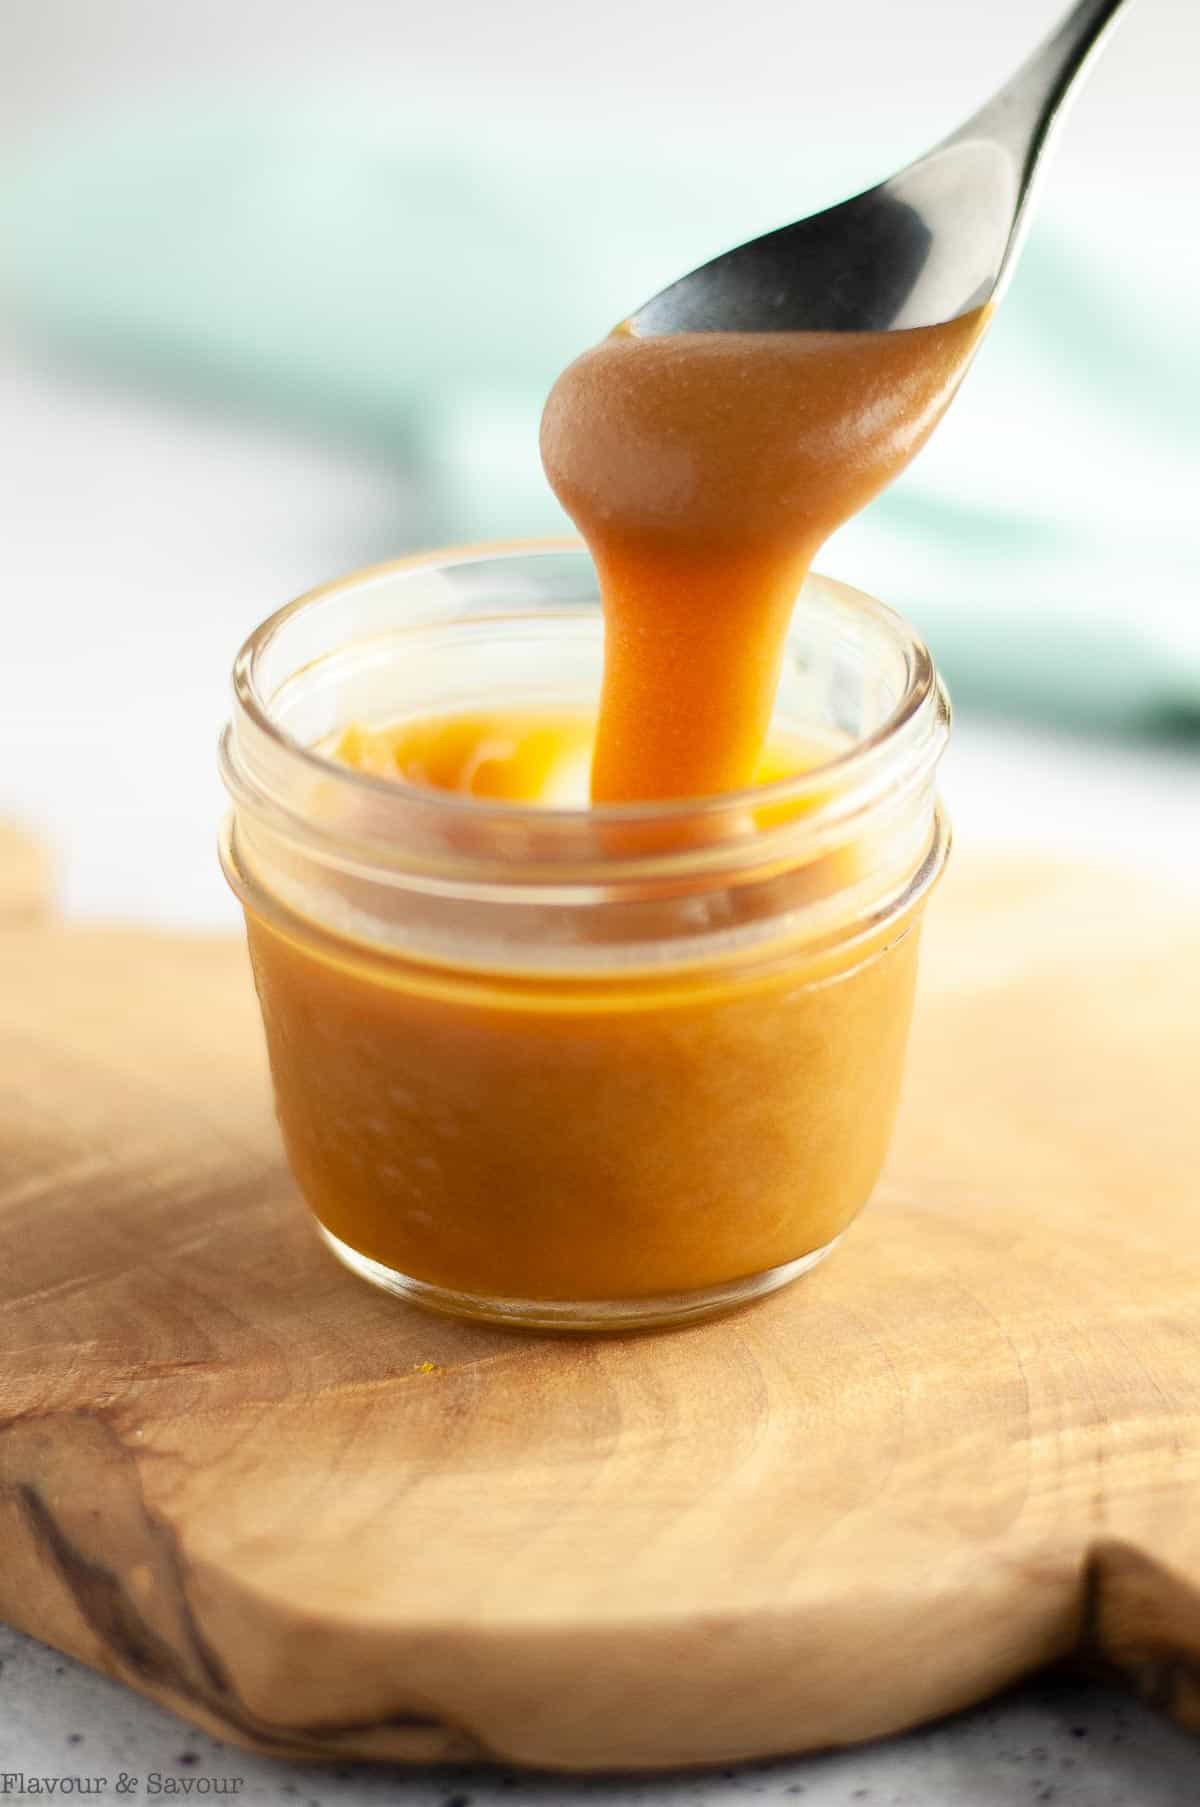 A spoonful of salted caramel sauce.